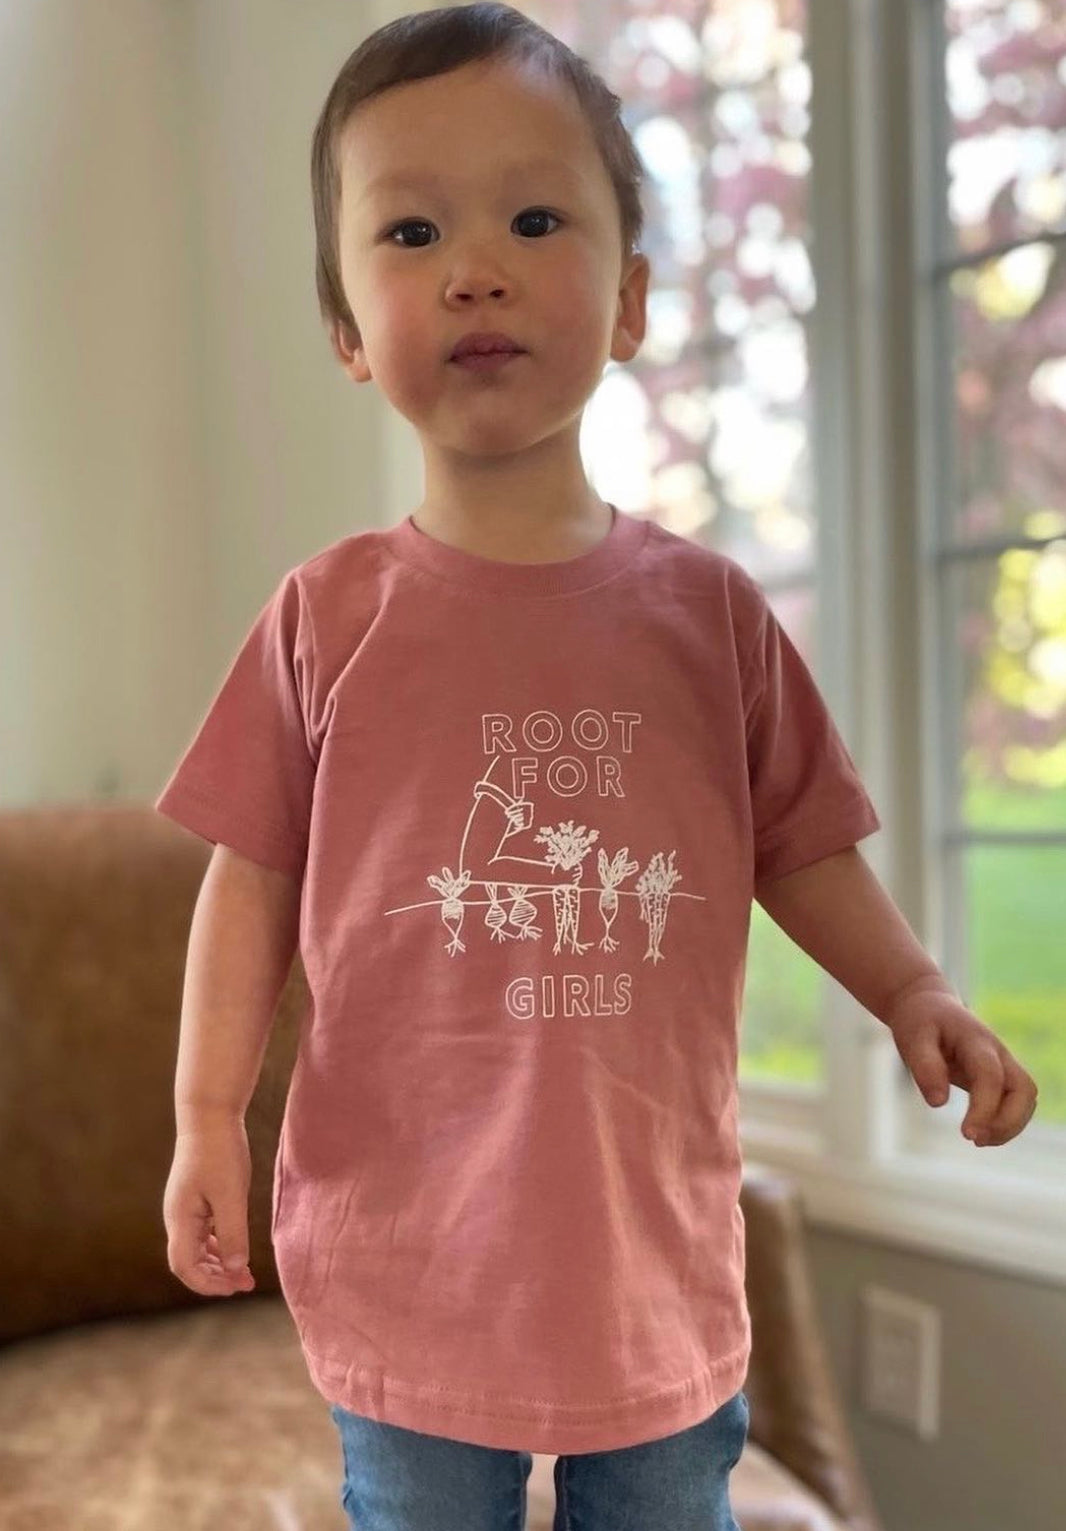 A toddler wears a mauve "Root for Girls" tee with jeans